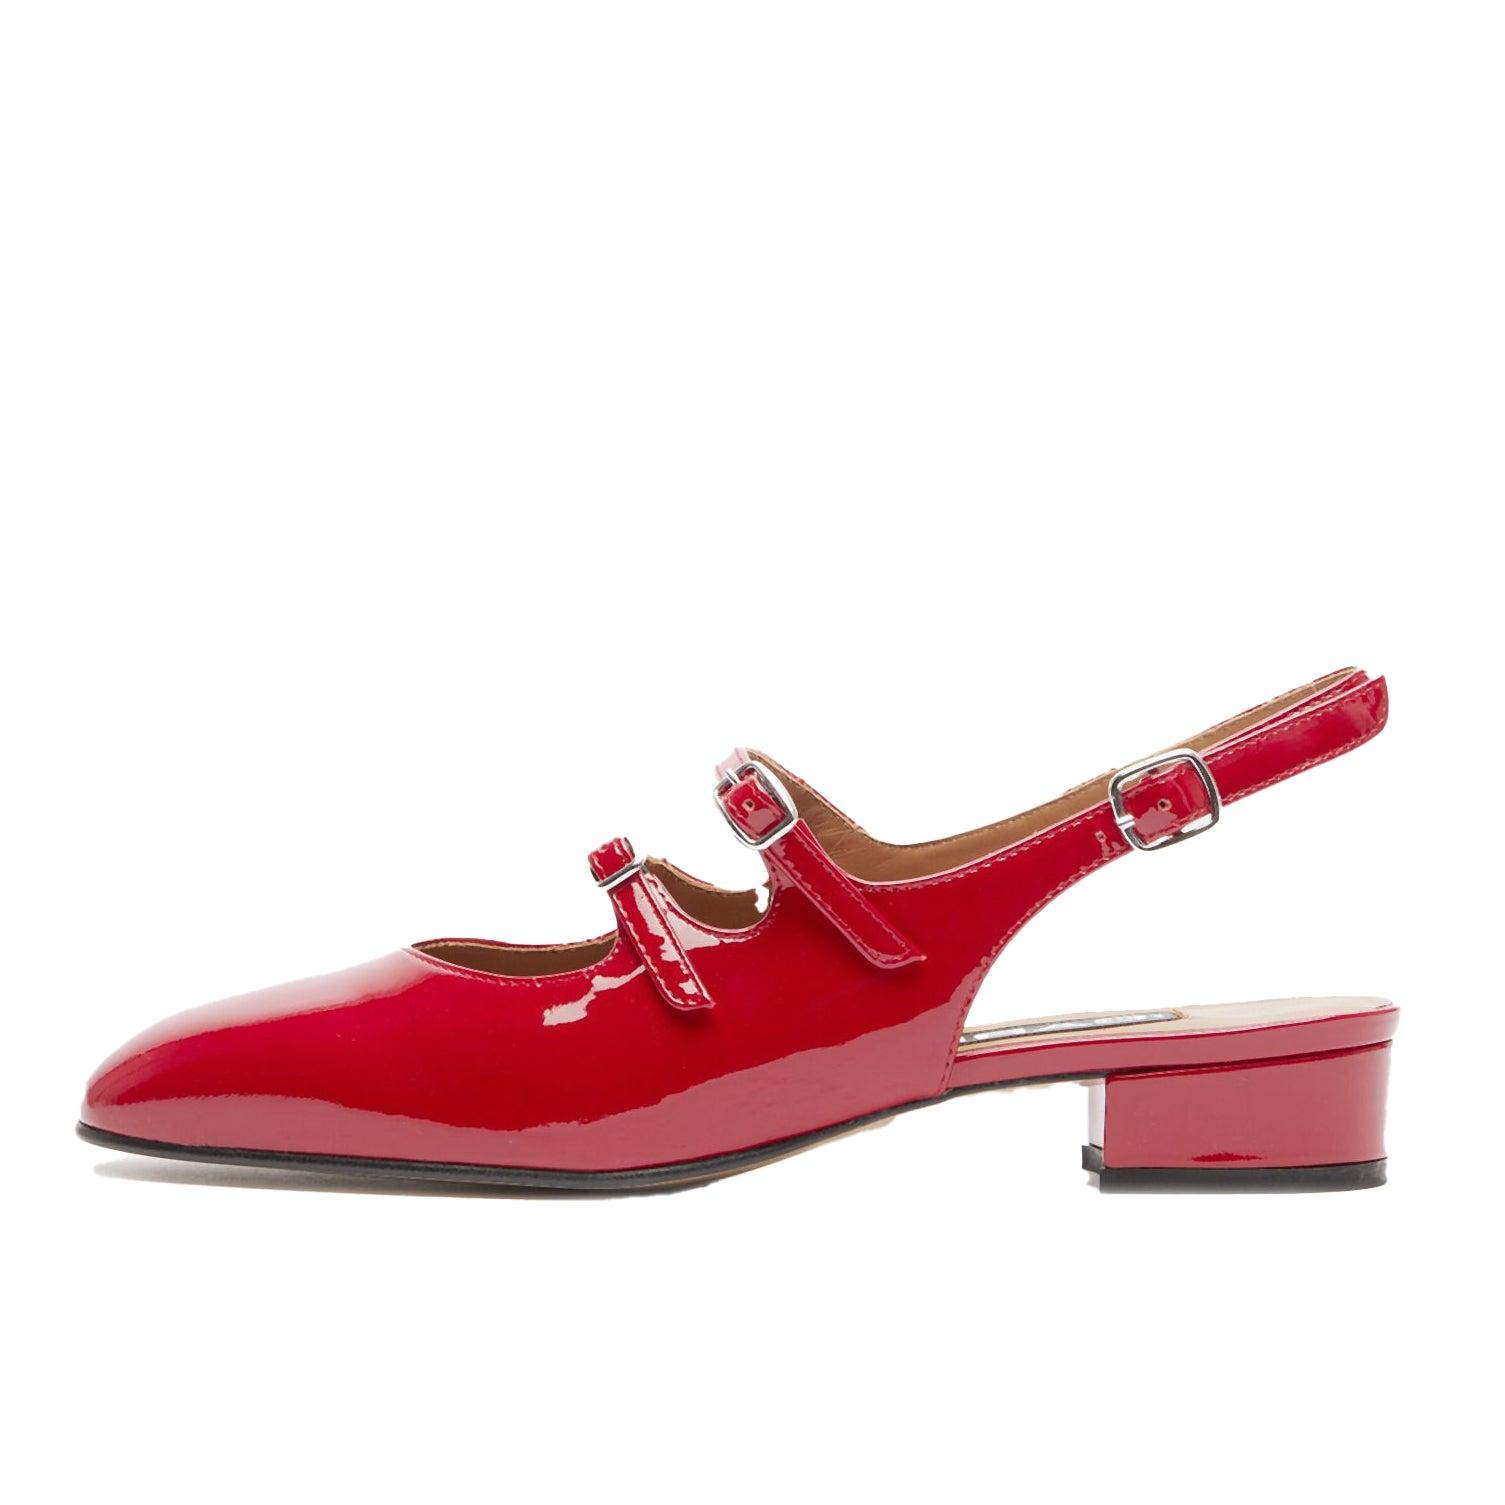 CAREL Peche Red Patent Leather Mary Jane Slingback Pumps in Blue | Lyst